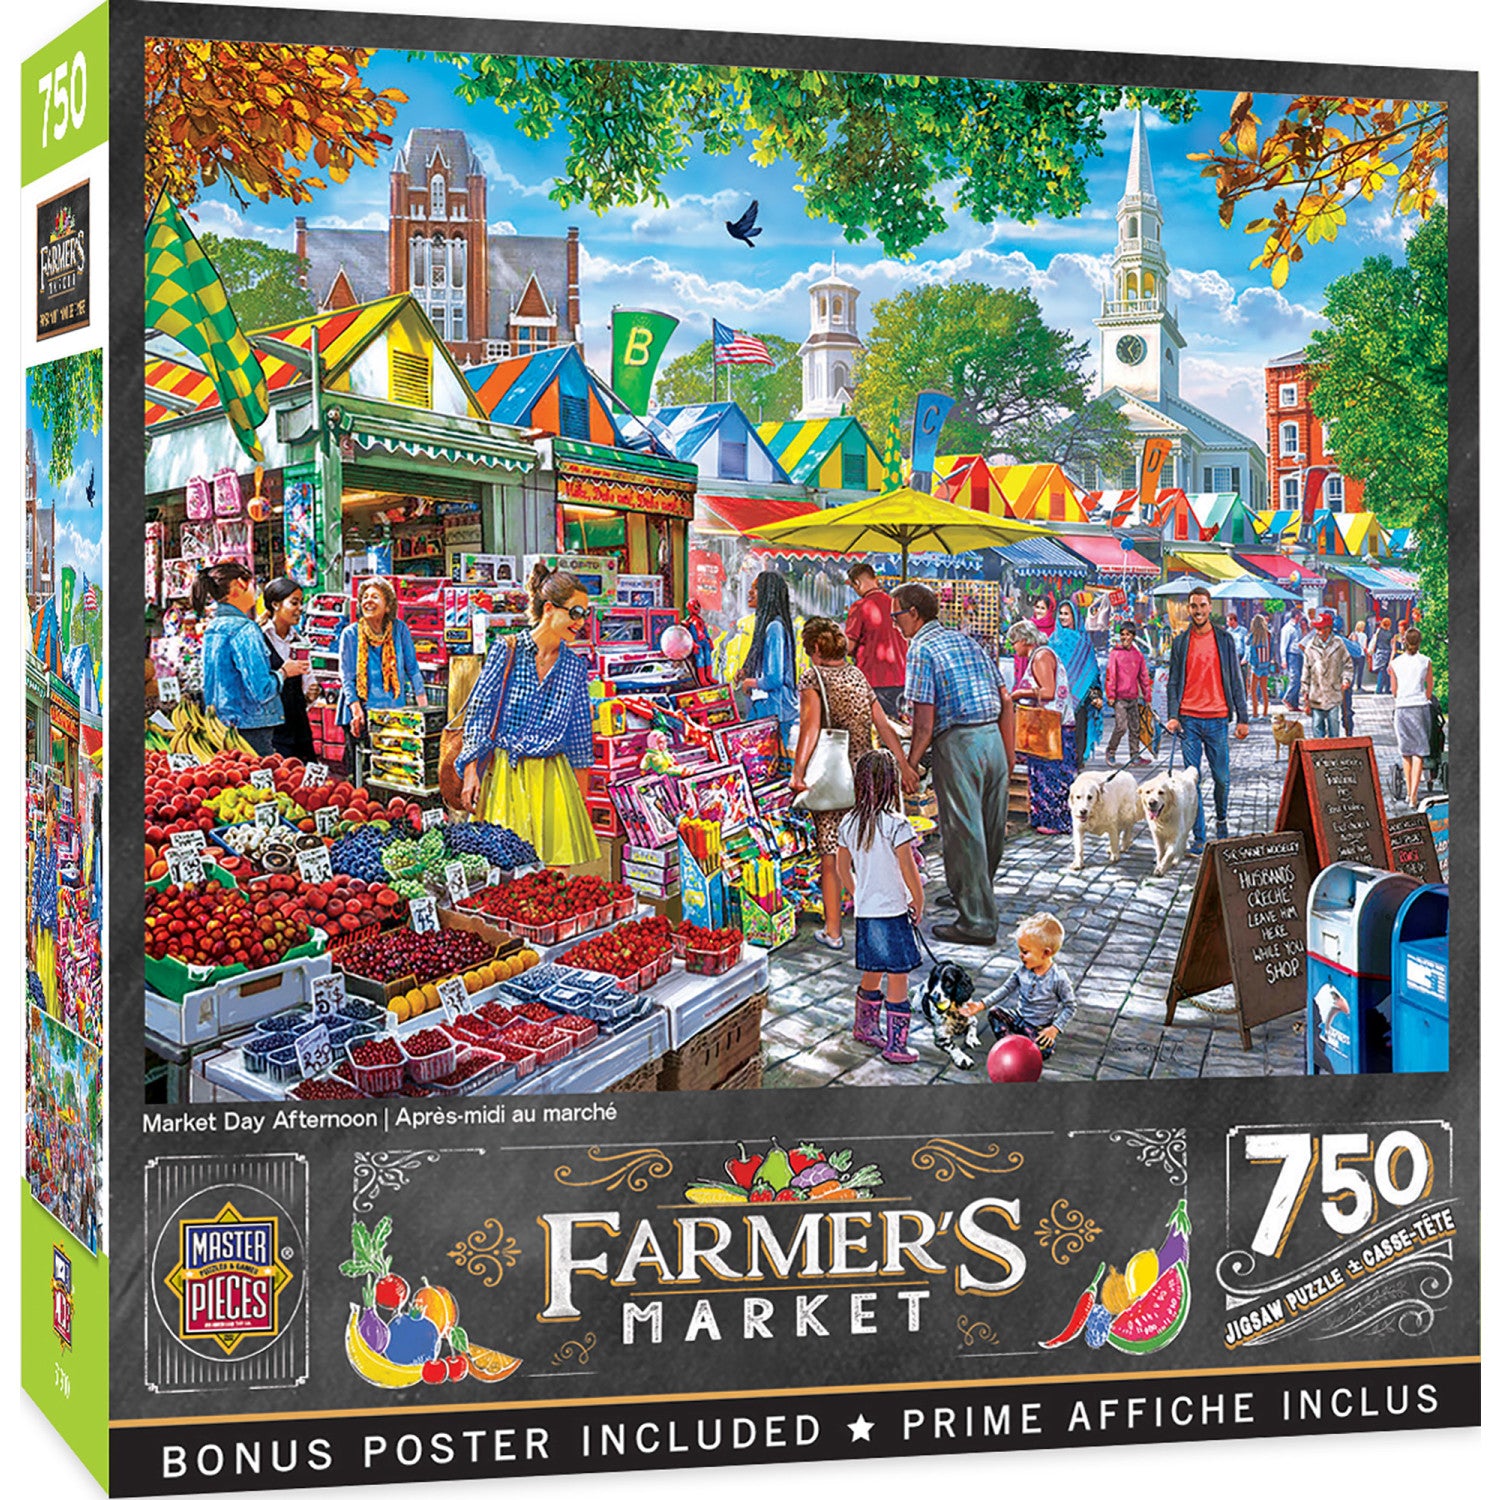 Farmer's Market - Market Day Afternoon 750 Piece Jigsaw Puzzle